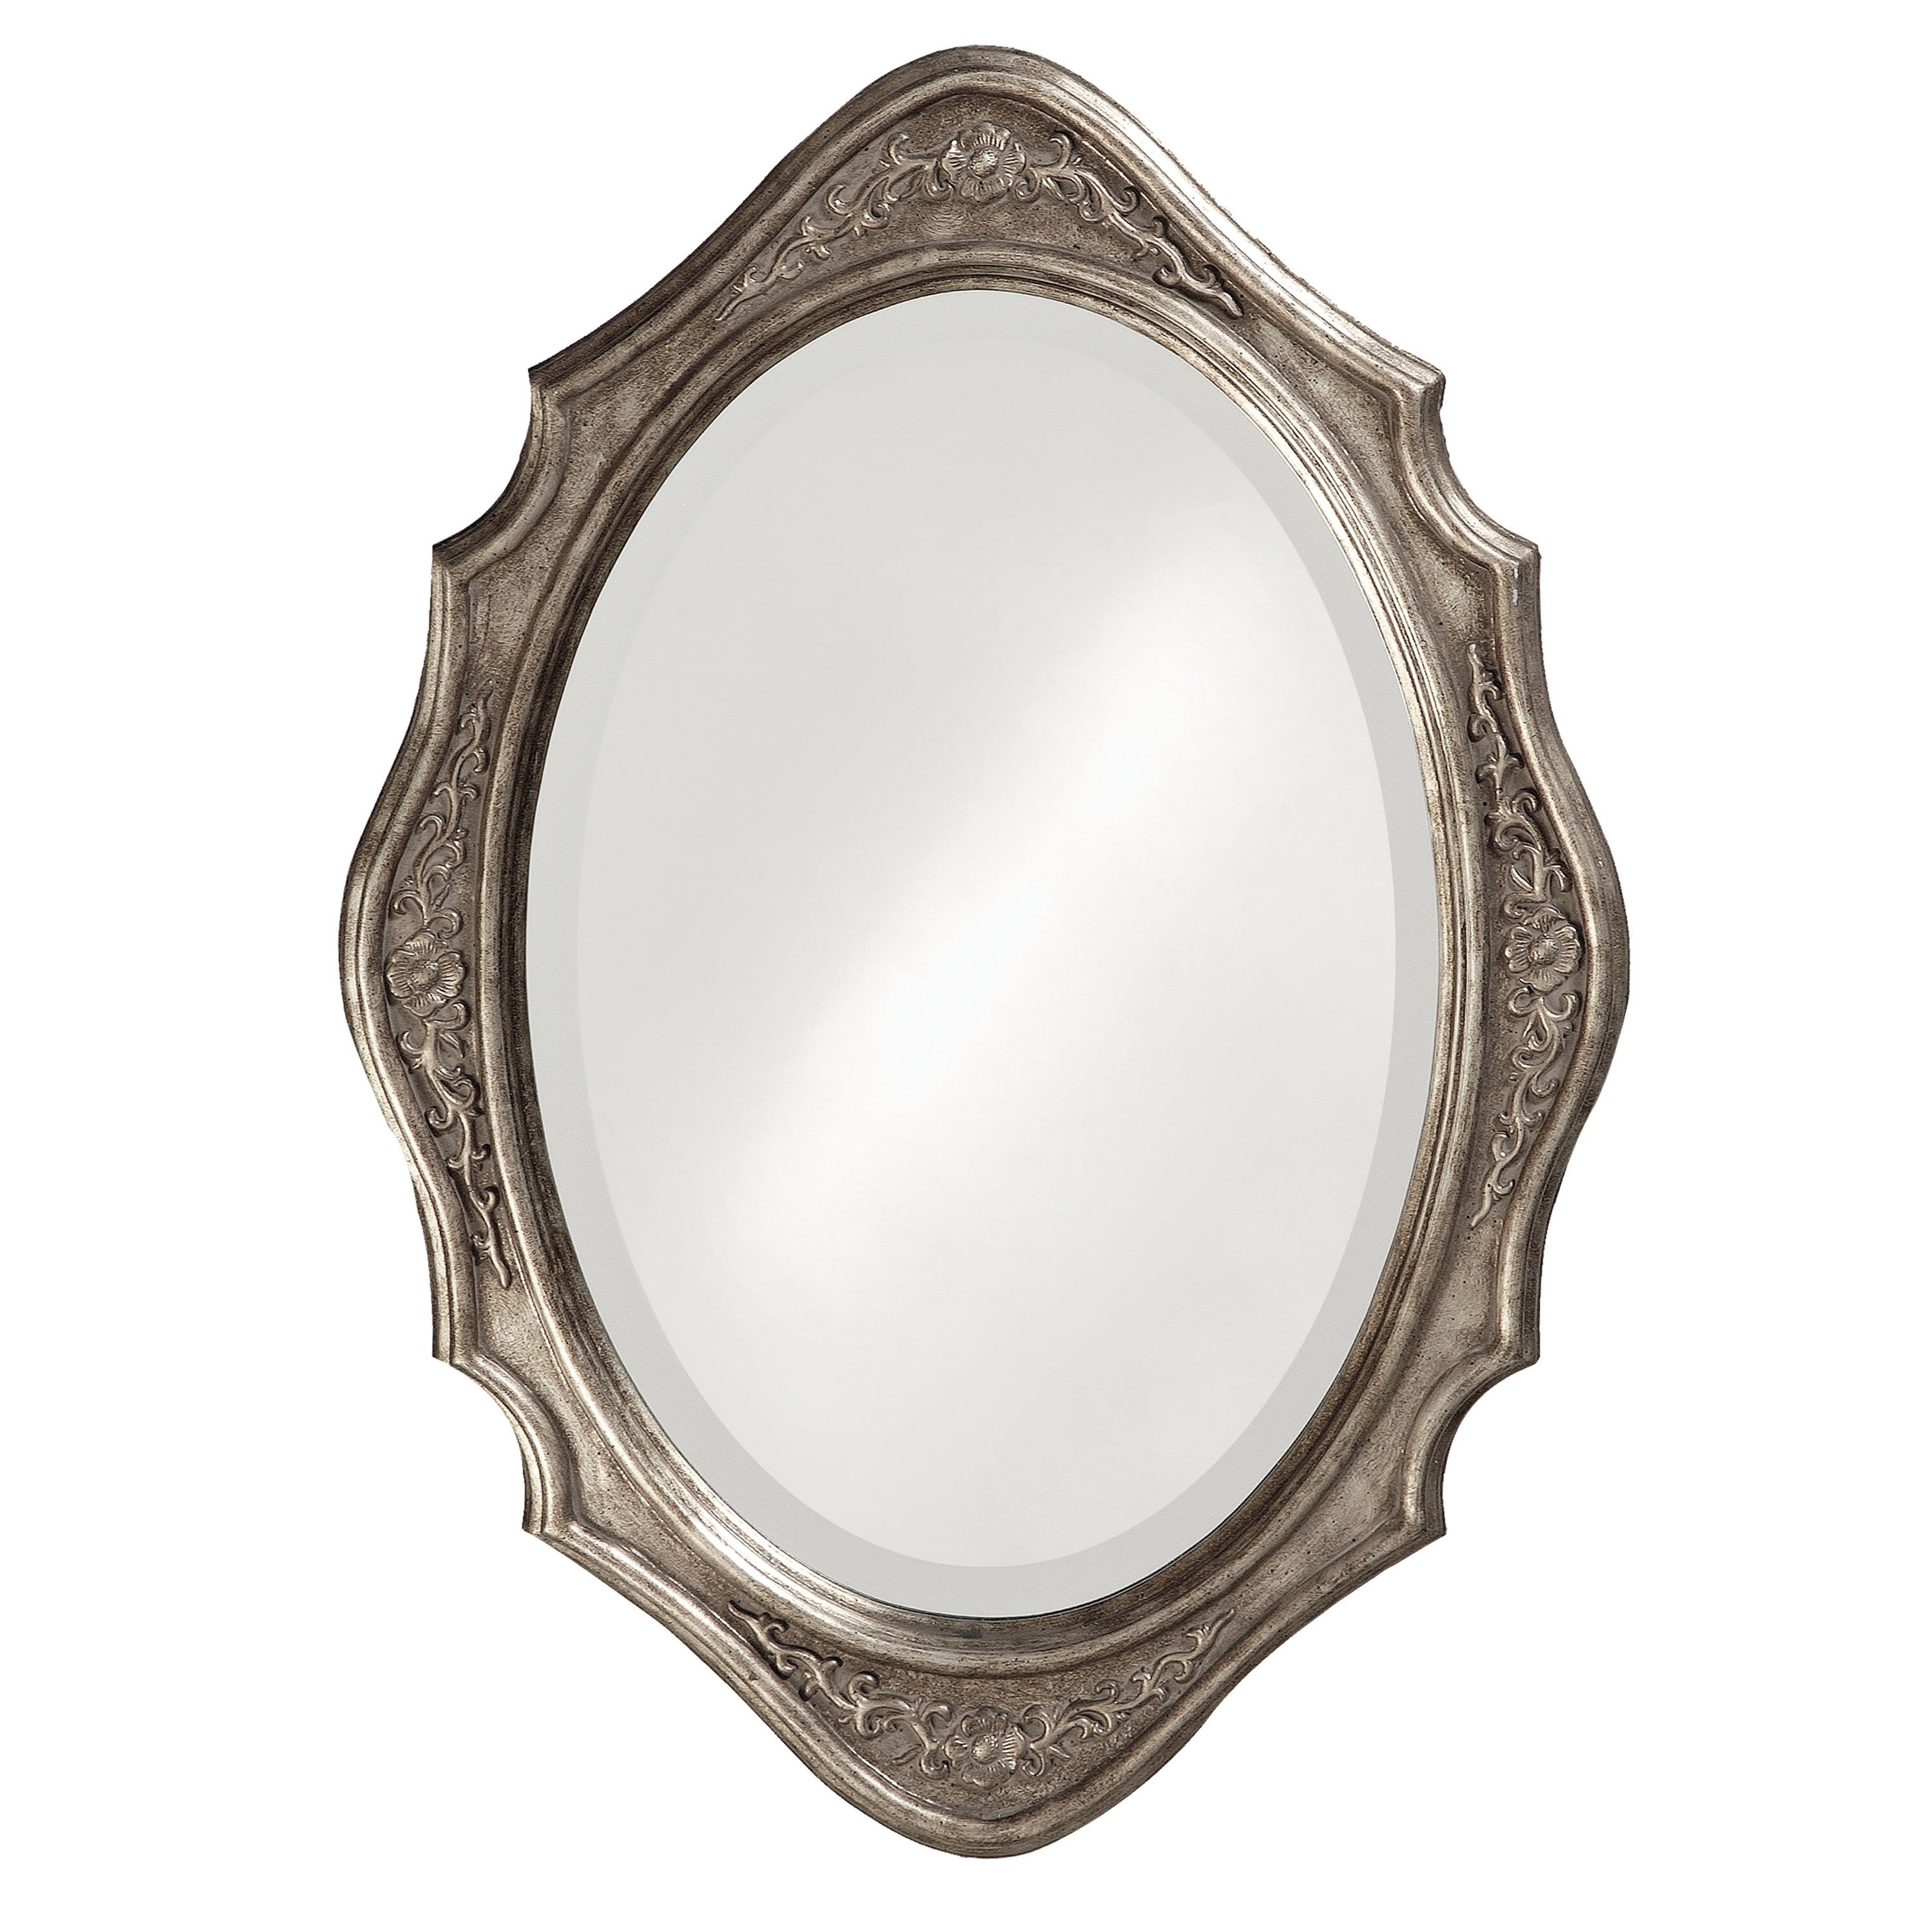 Tracy Silver Wood Oval Mirror Free Shipping Today Overstock With Silver Oval Mirror (View 15 of 15)